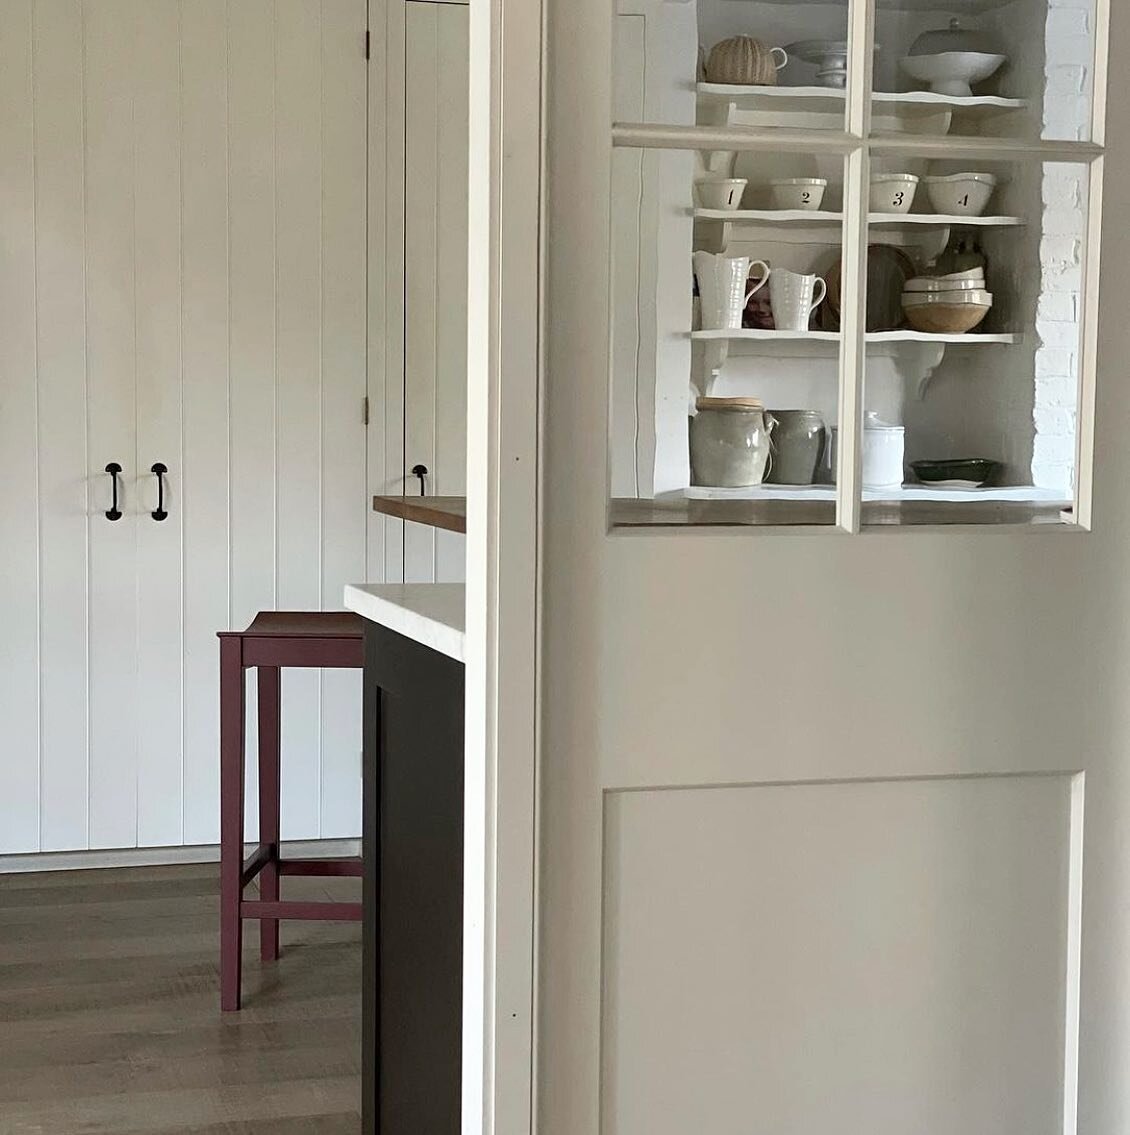 In our kitchen at home, we wanted additional cupboards and worktop space for optimum functionality, but it was important not to shut the space down. A glazed timber partition fit the job perfectly! This approach allows plenty of natural light to stil